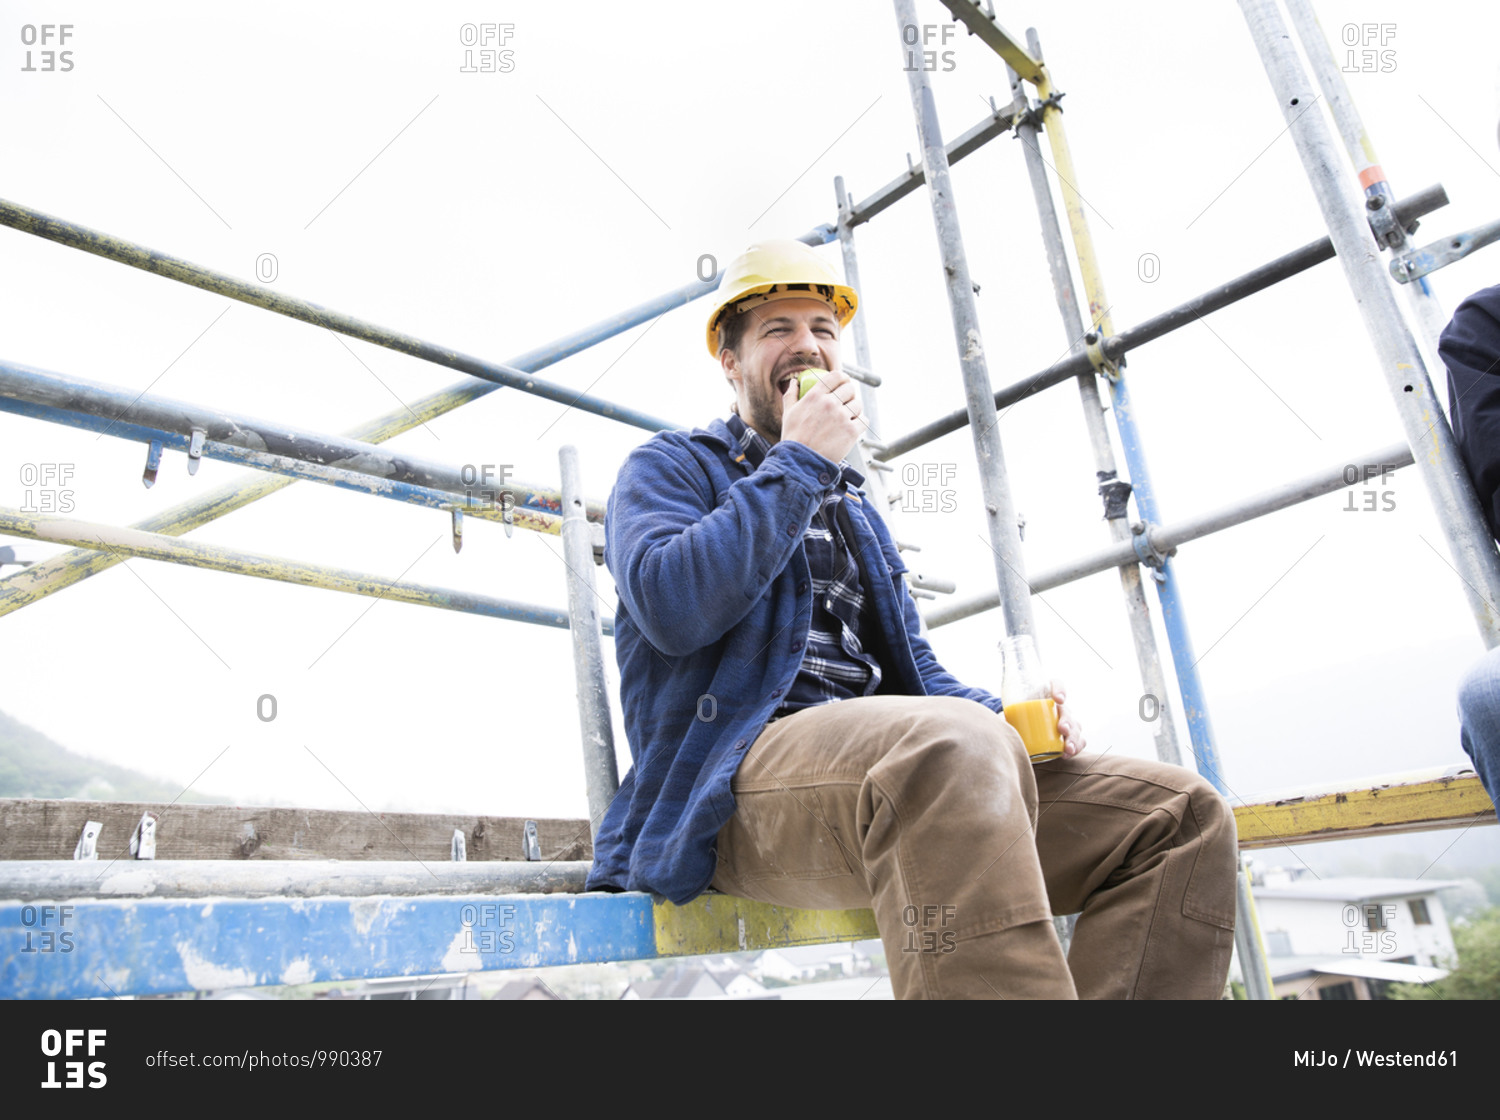 Ear protectors on wood with male worker carrying wood in background at construction site